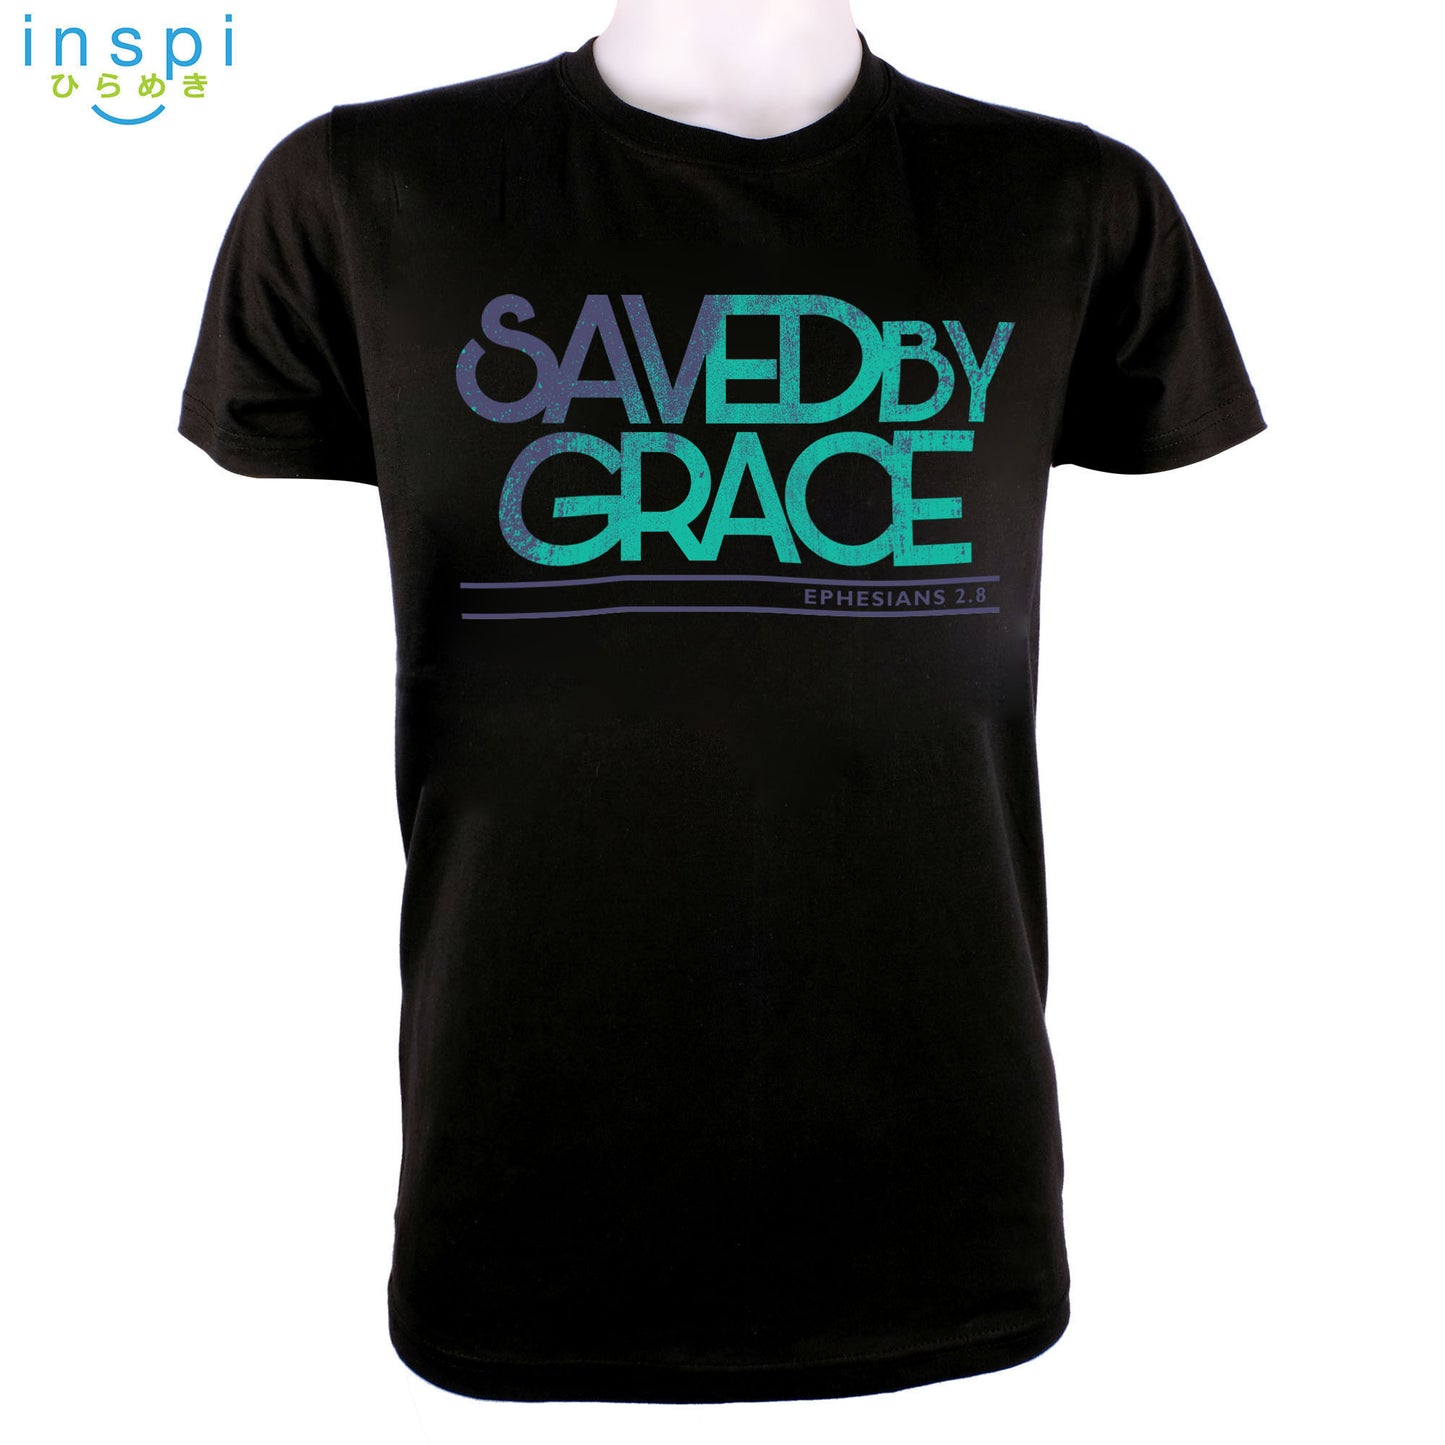 INSPI Shirt Saved by Grace Mens Statement Tshirt